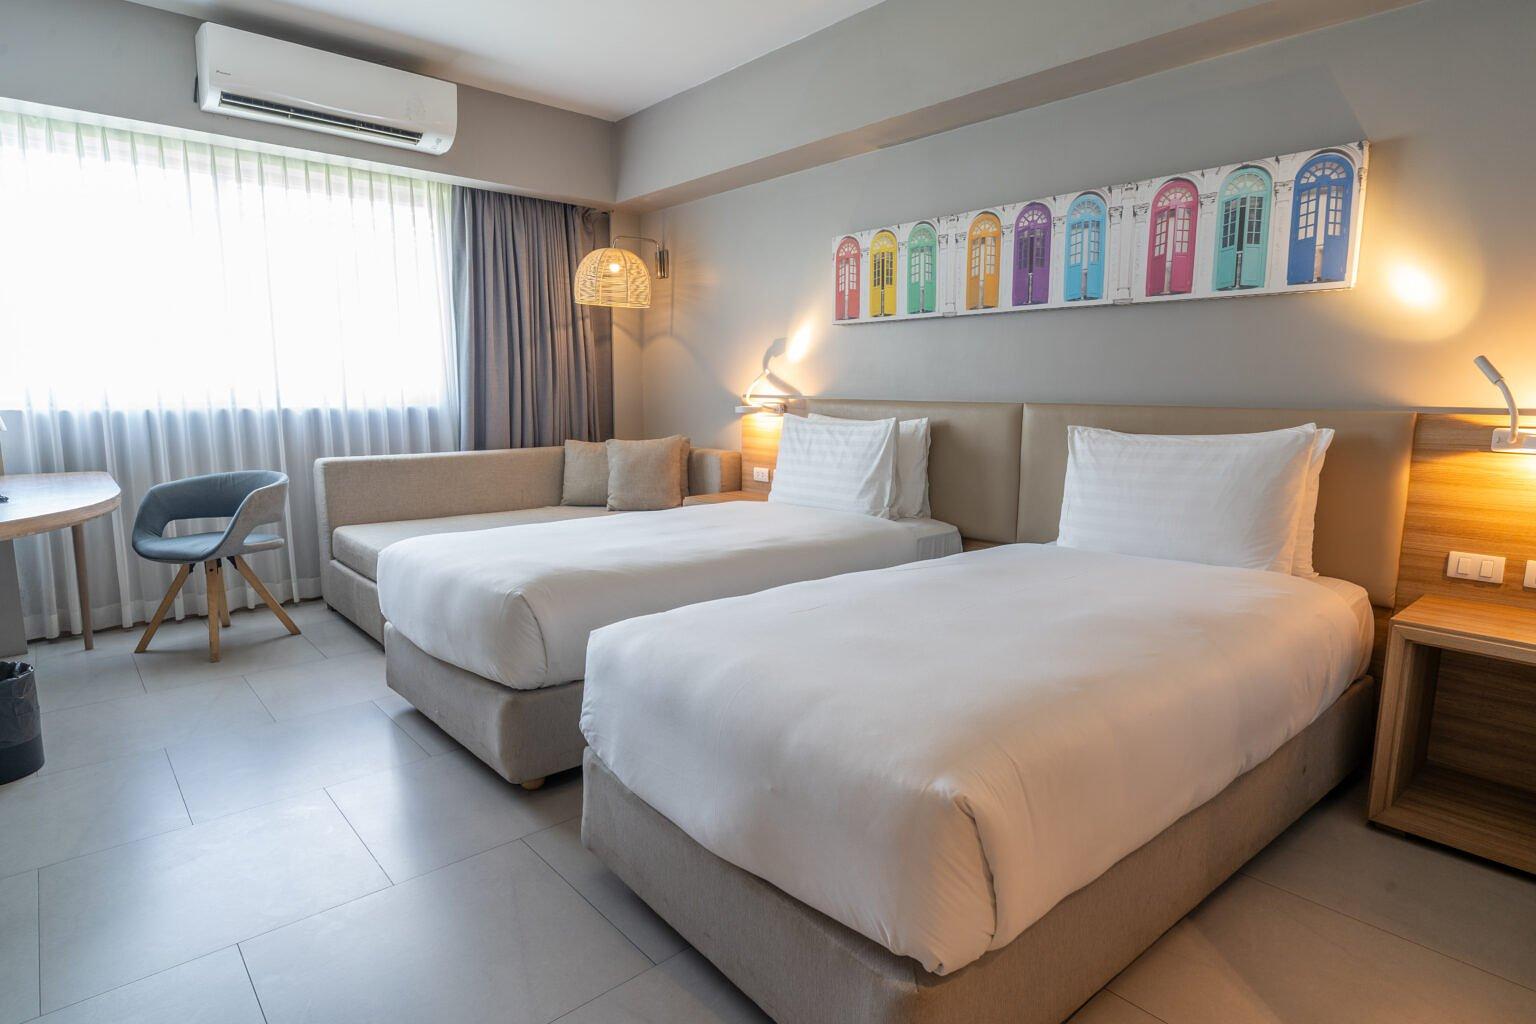 Deluxe Mountain View (Breakfast included) - Journeyhub Phuket Patong